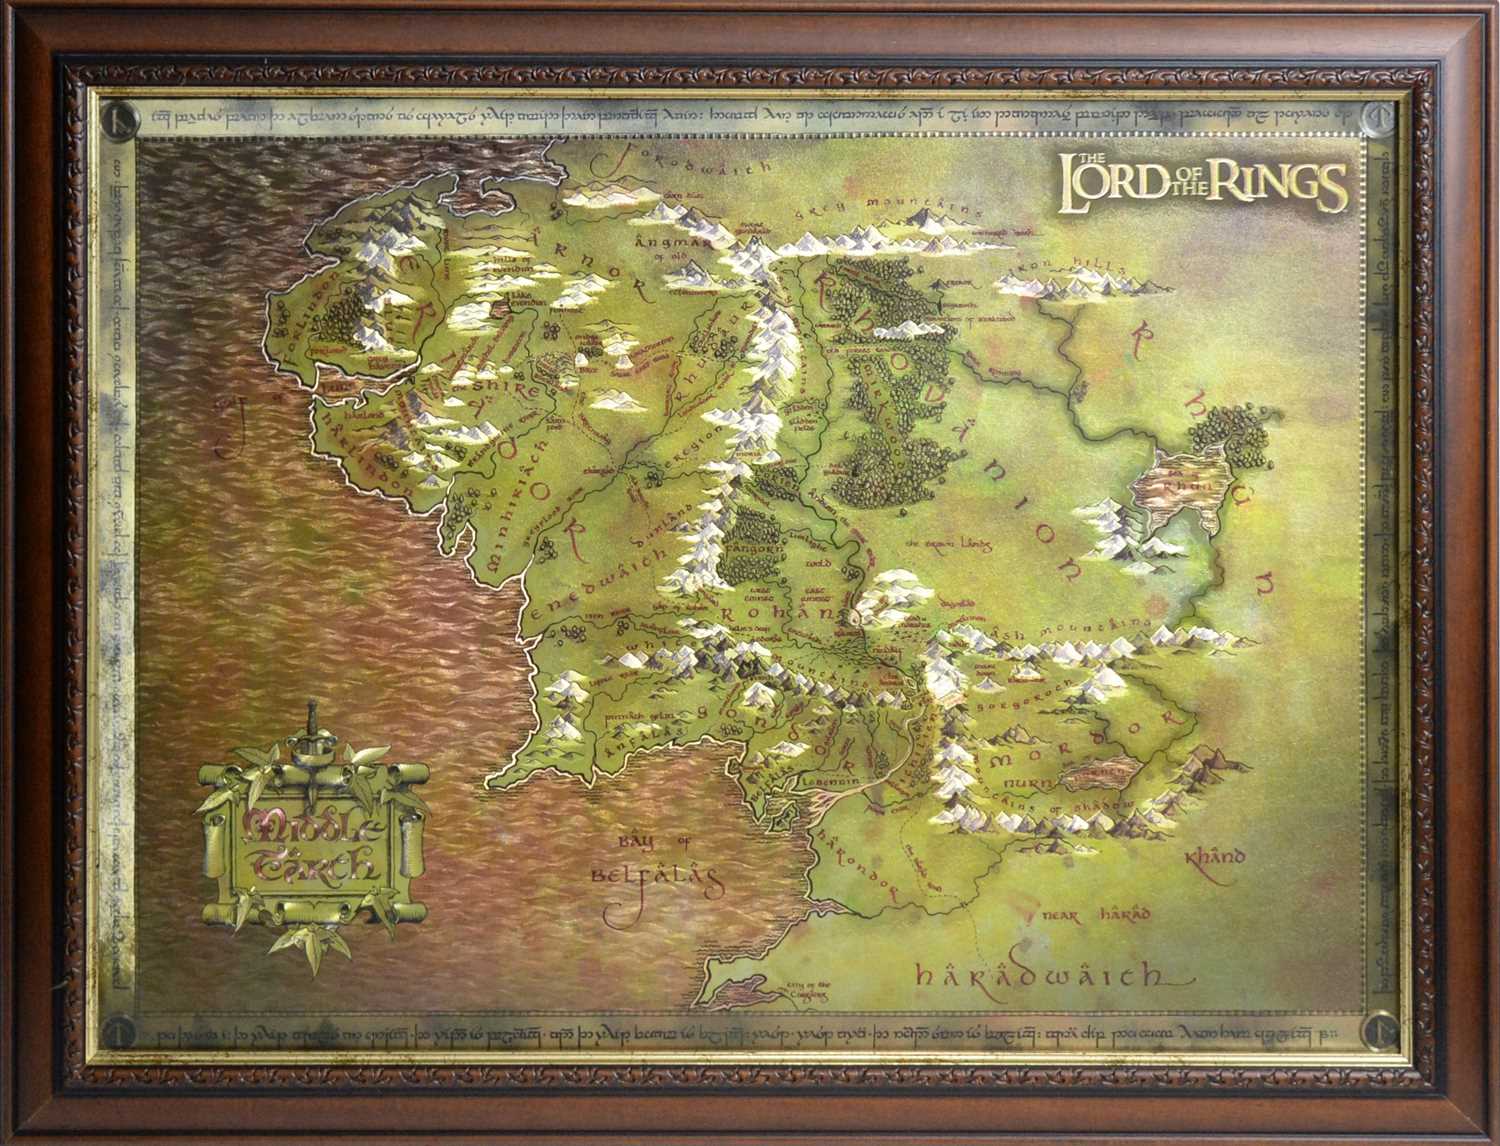 Maps in literature now and then: foldout to scroll-out – The Tolkien Society